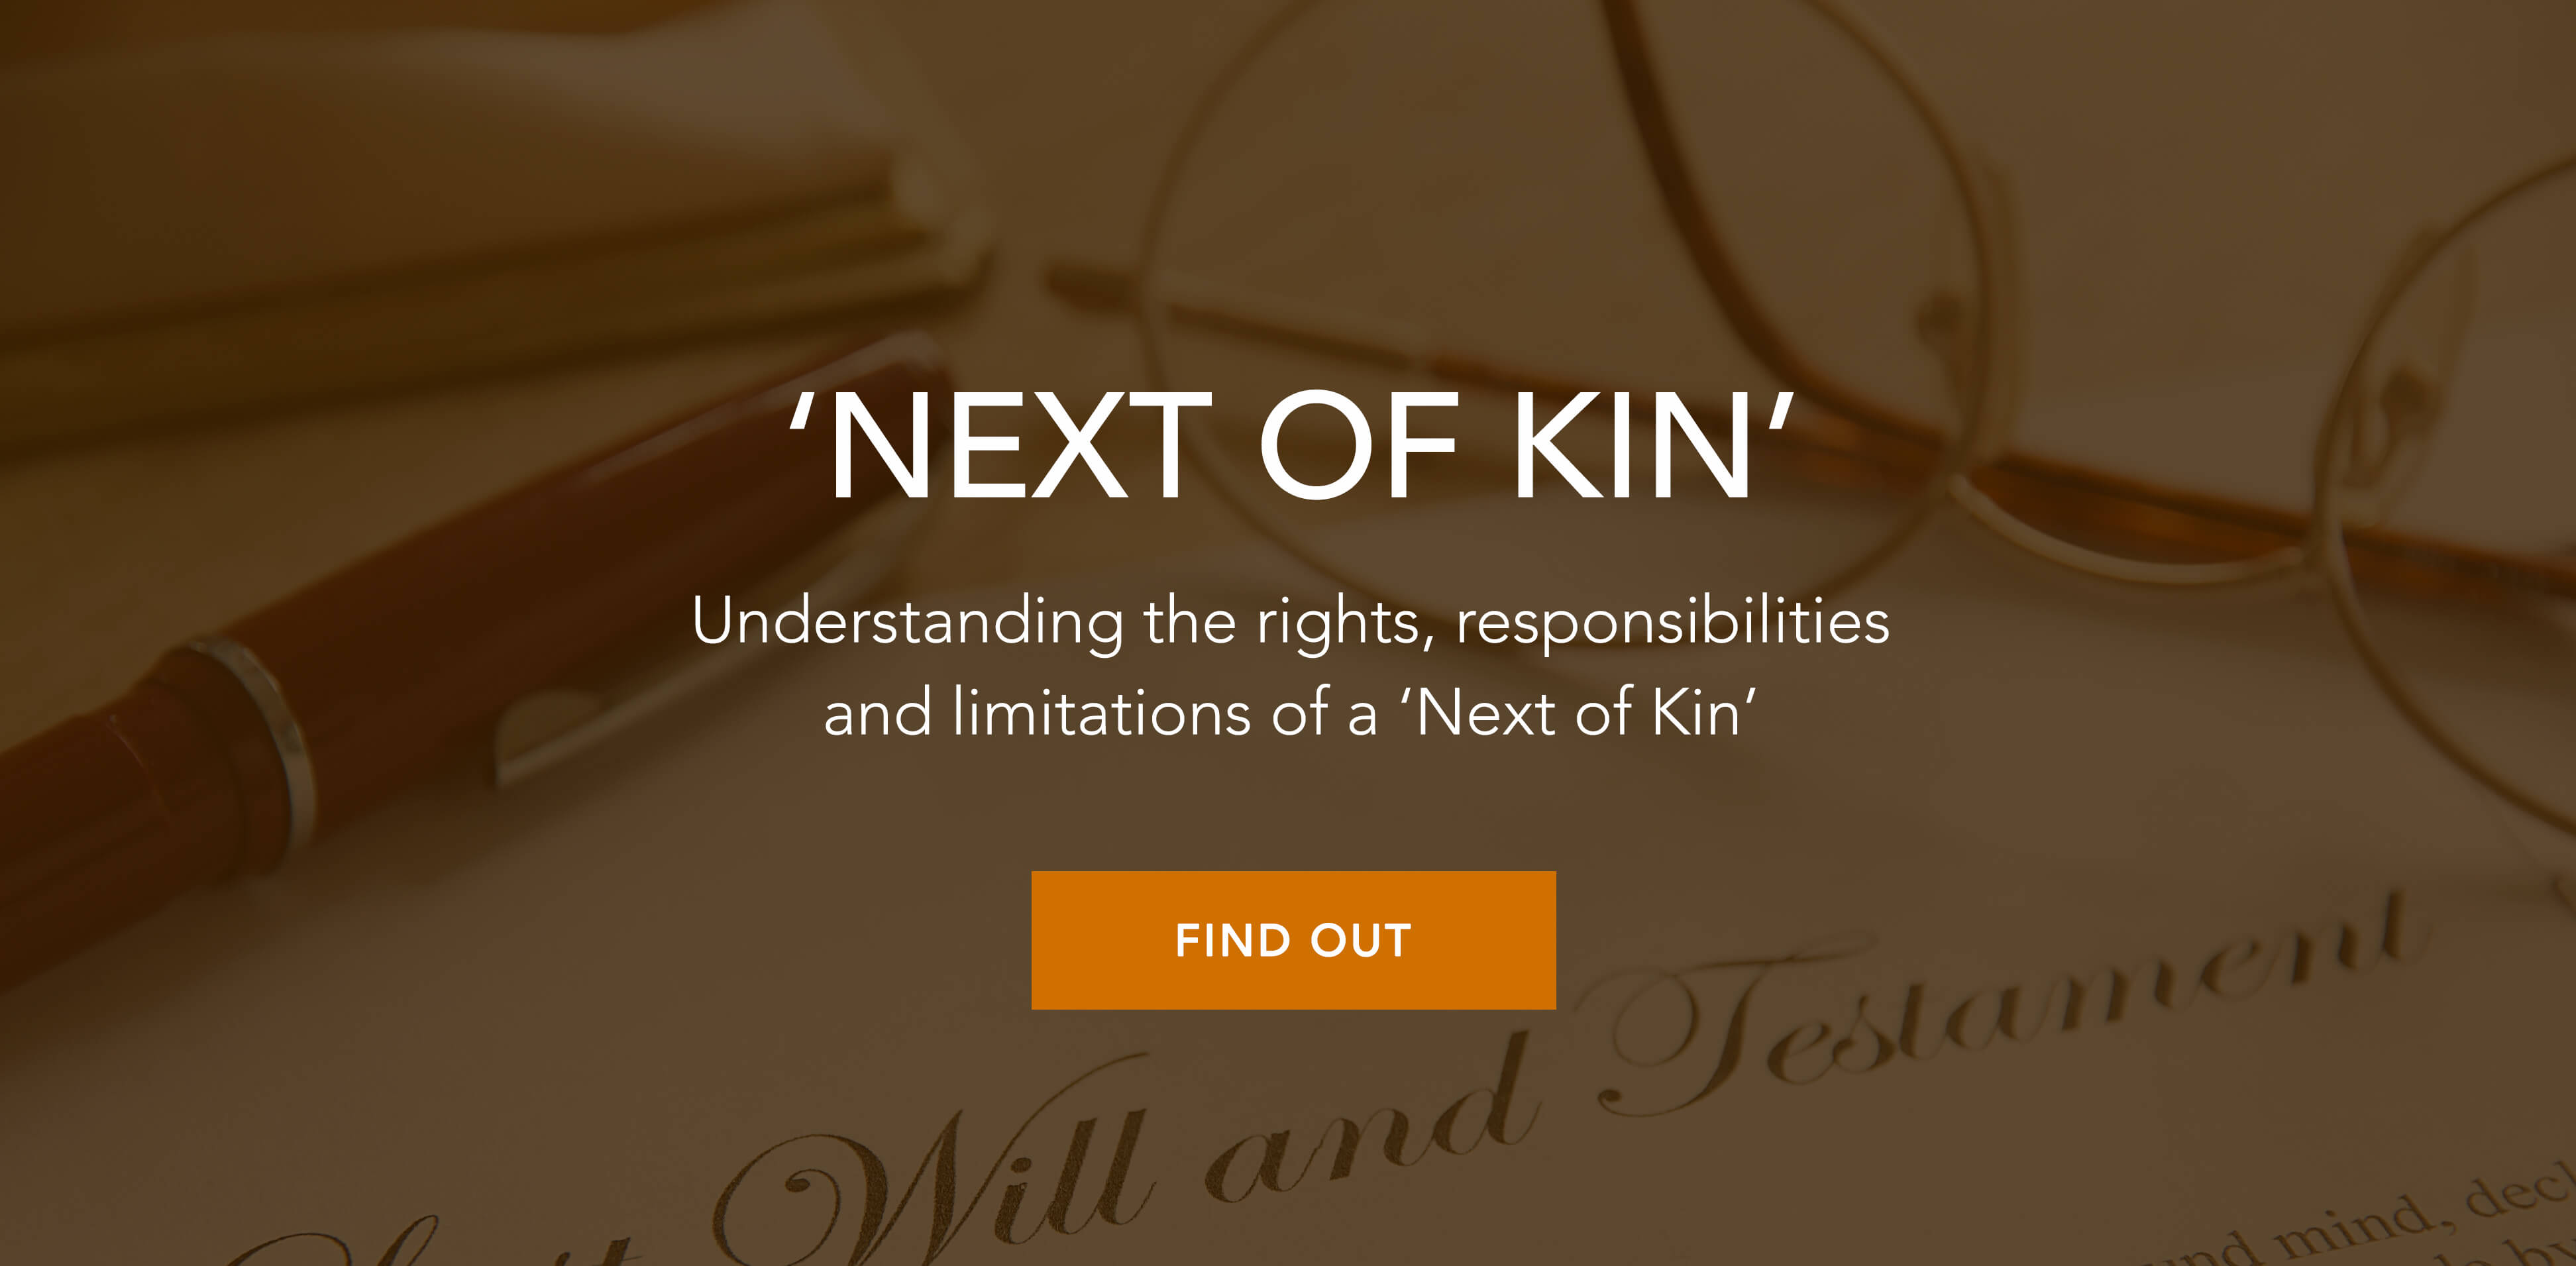 What does ‘Next of Kin’ mean?